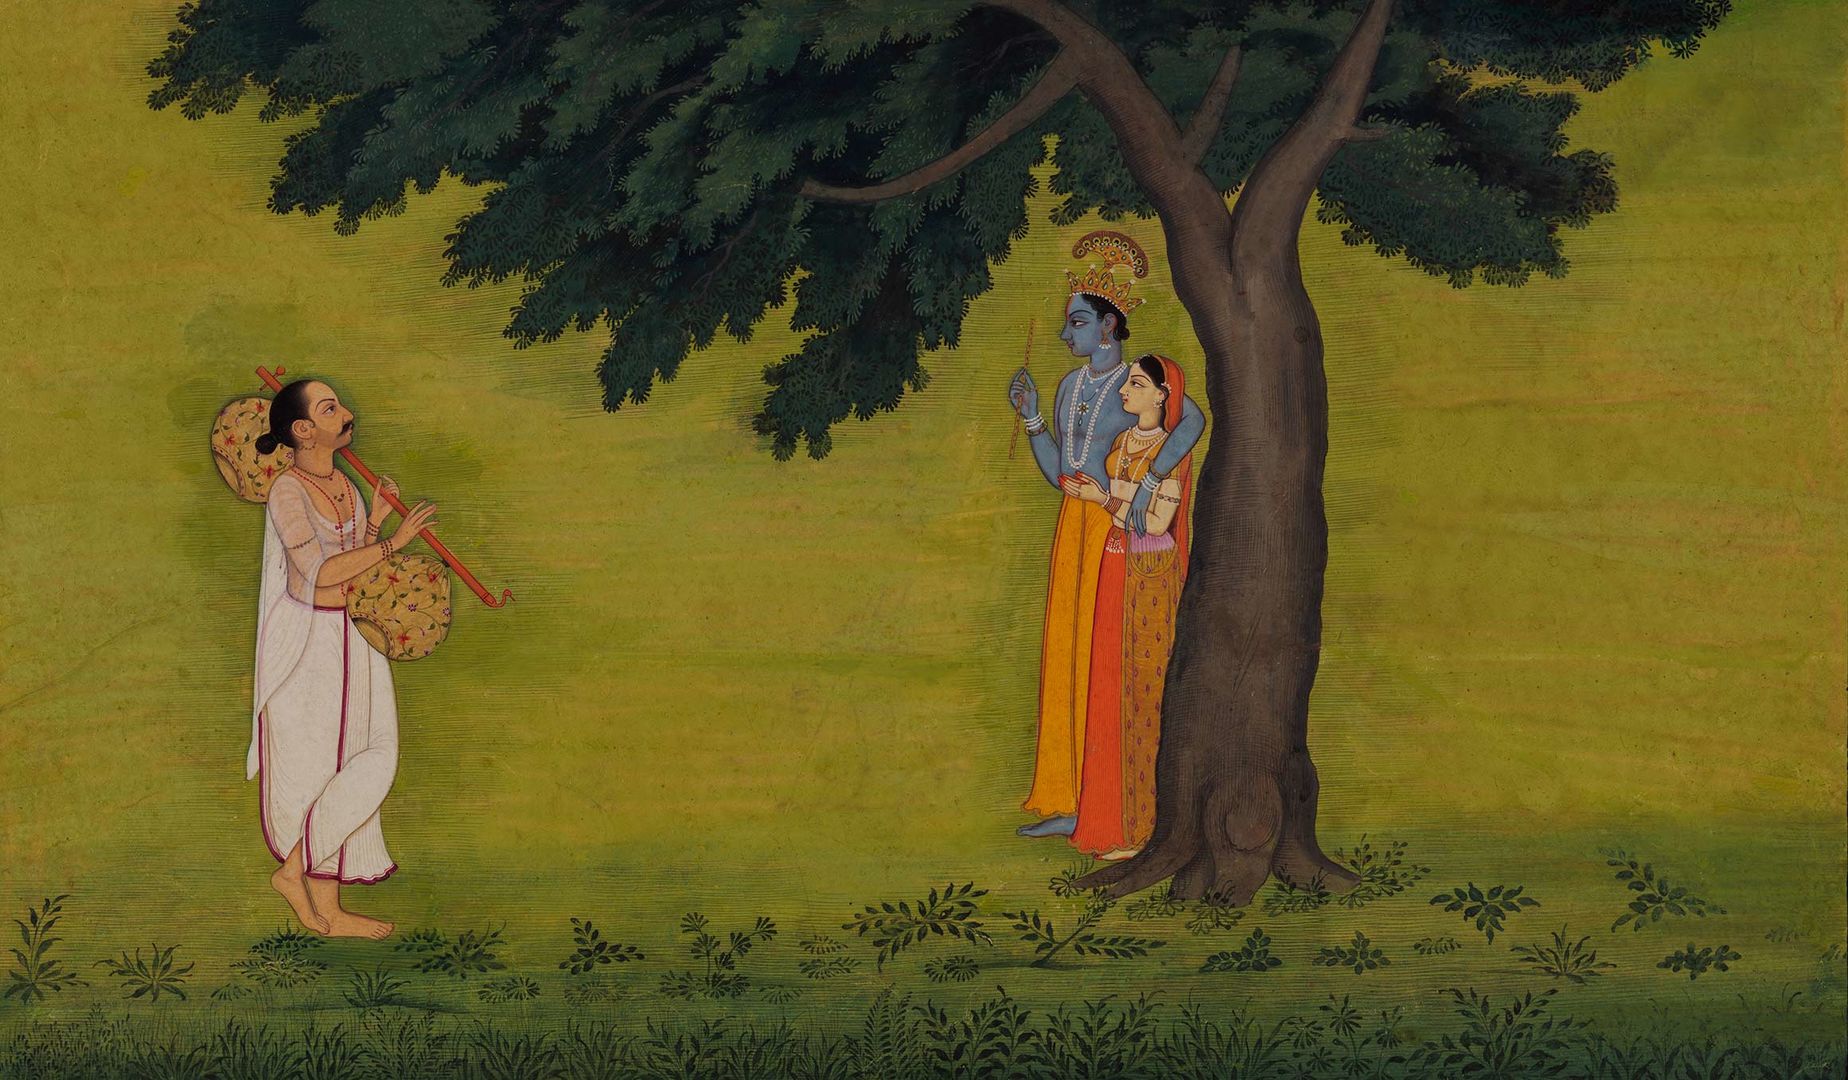 The poet Jayadeva gazes at Krishna and Radha as they stand in the shade of a big tree